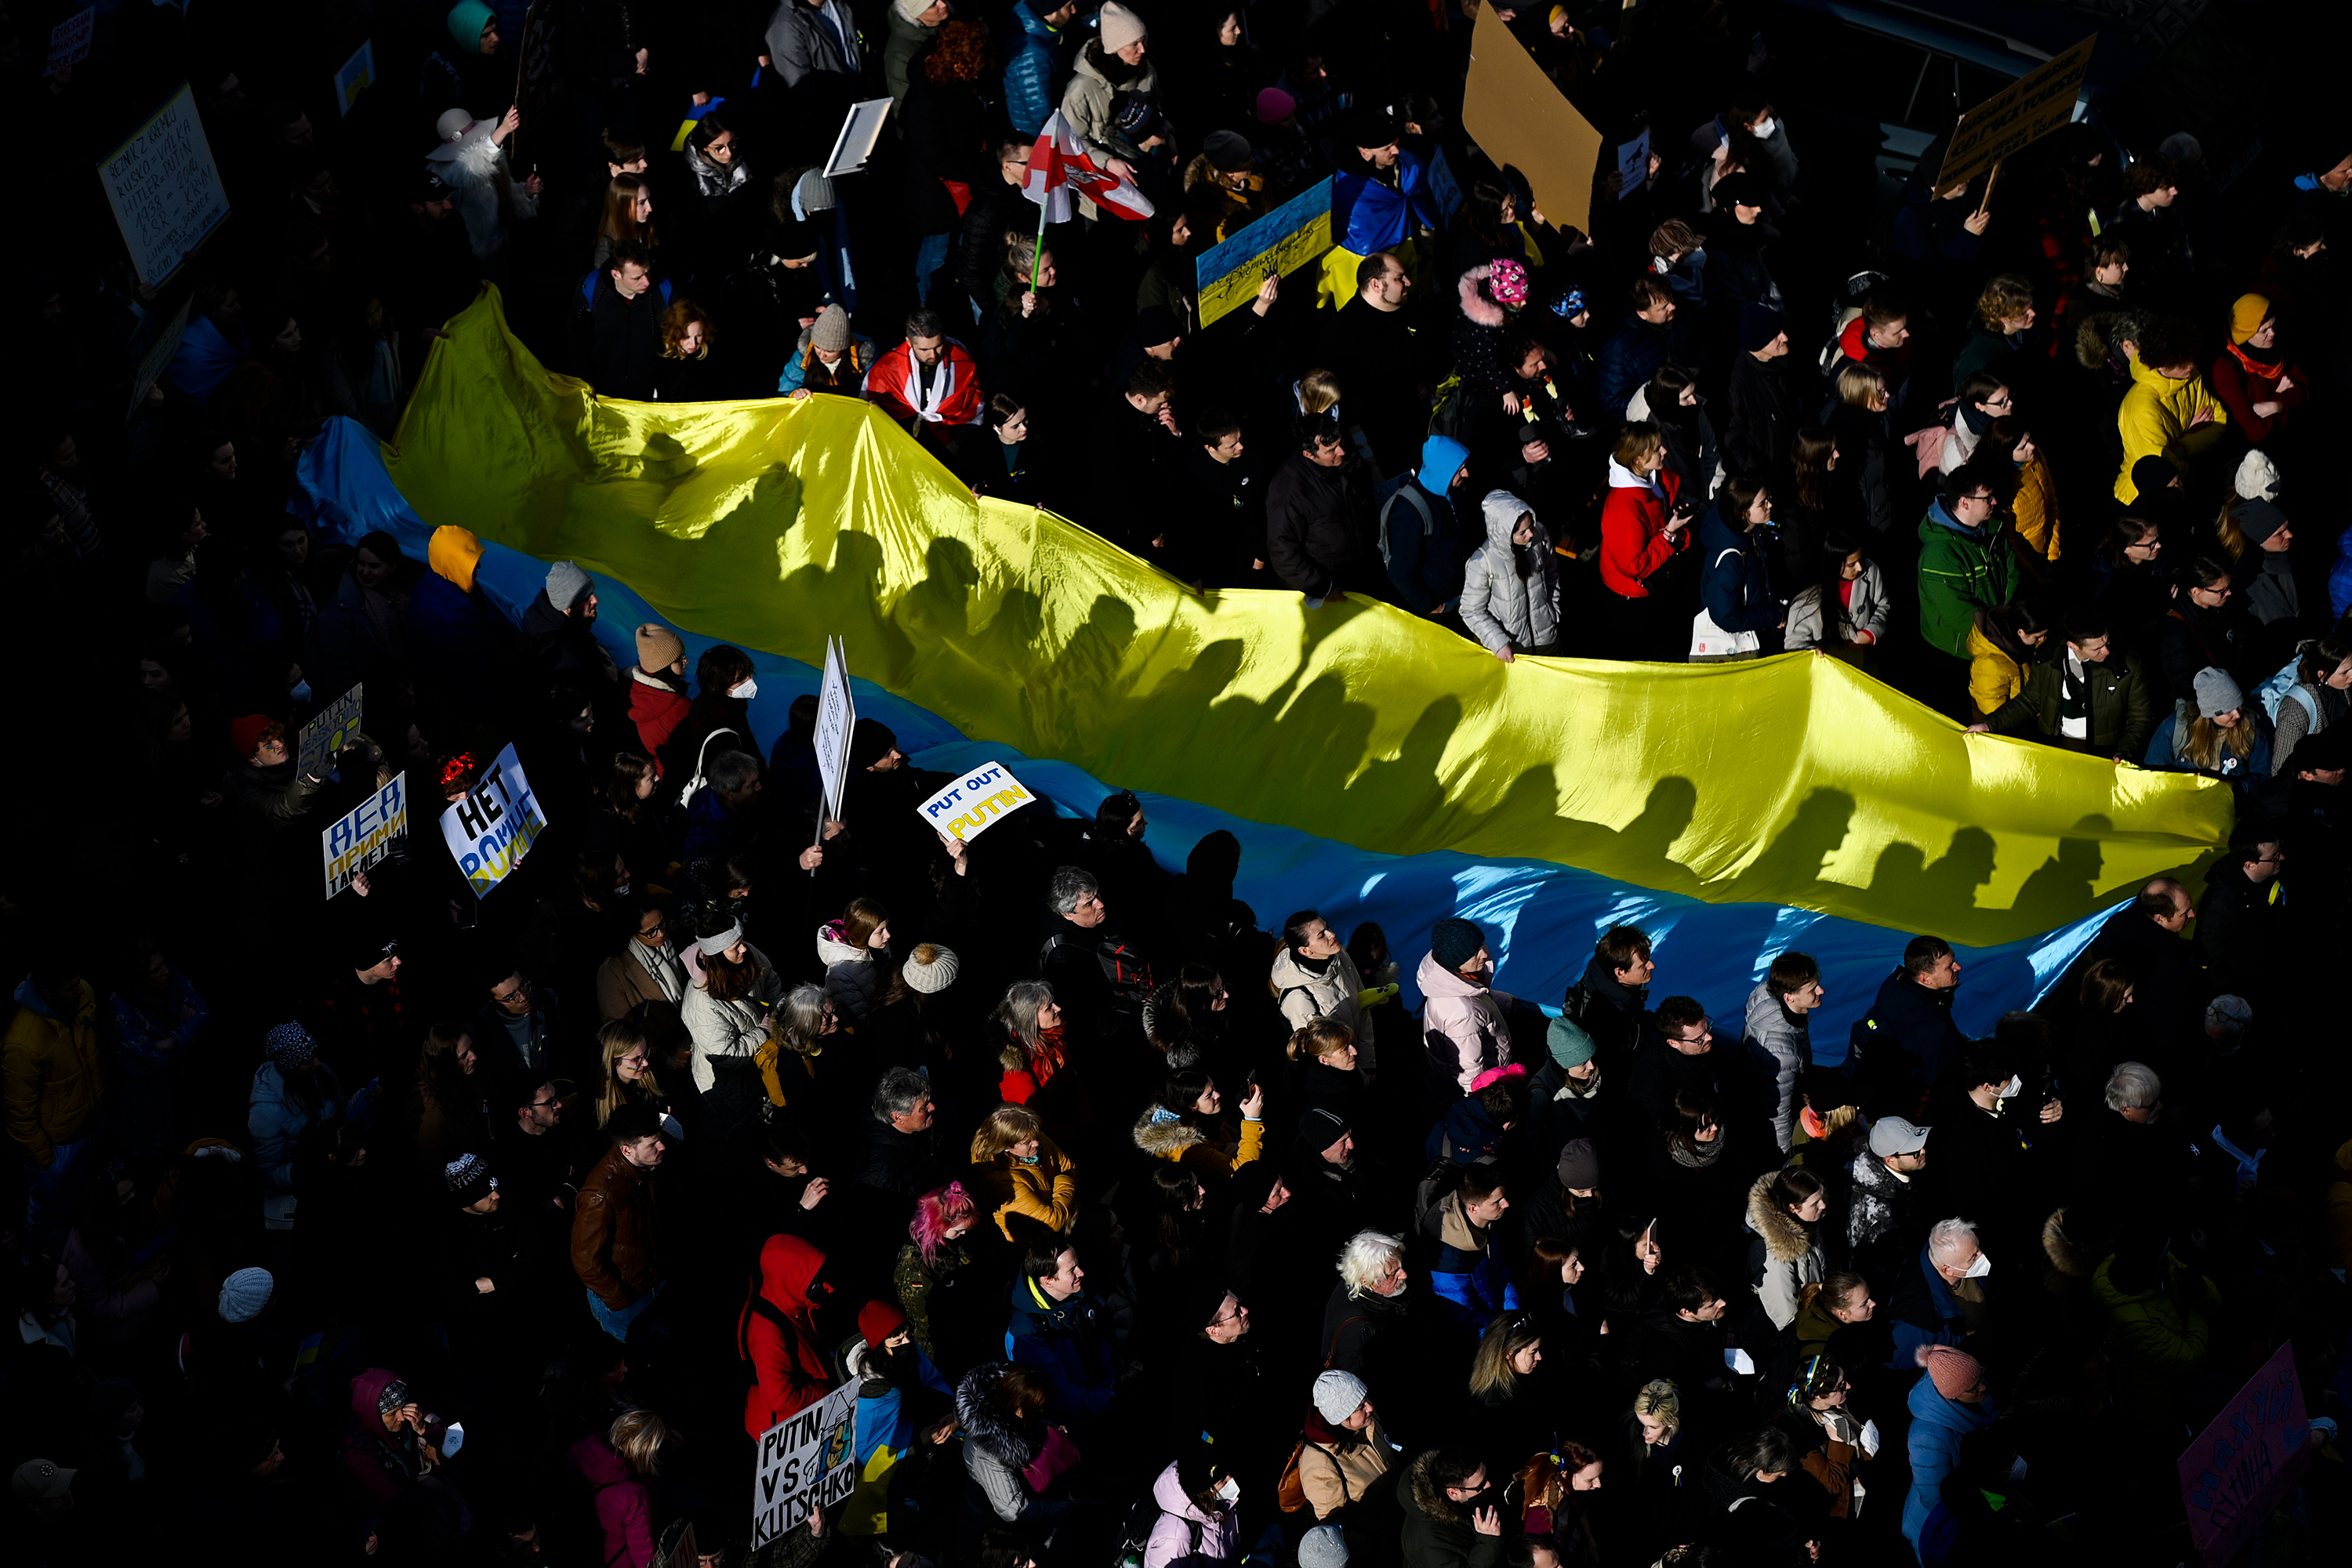 People gather for a demonstration against Russia’s invasion of Ukraine on February 27 in Prague, Czech Republic.